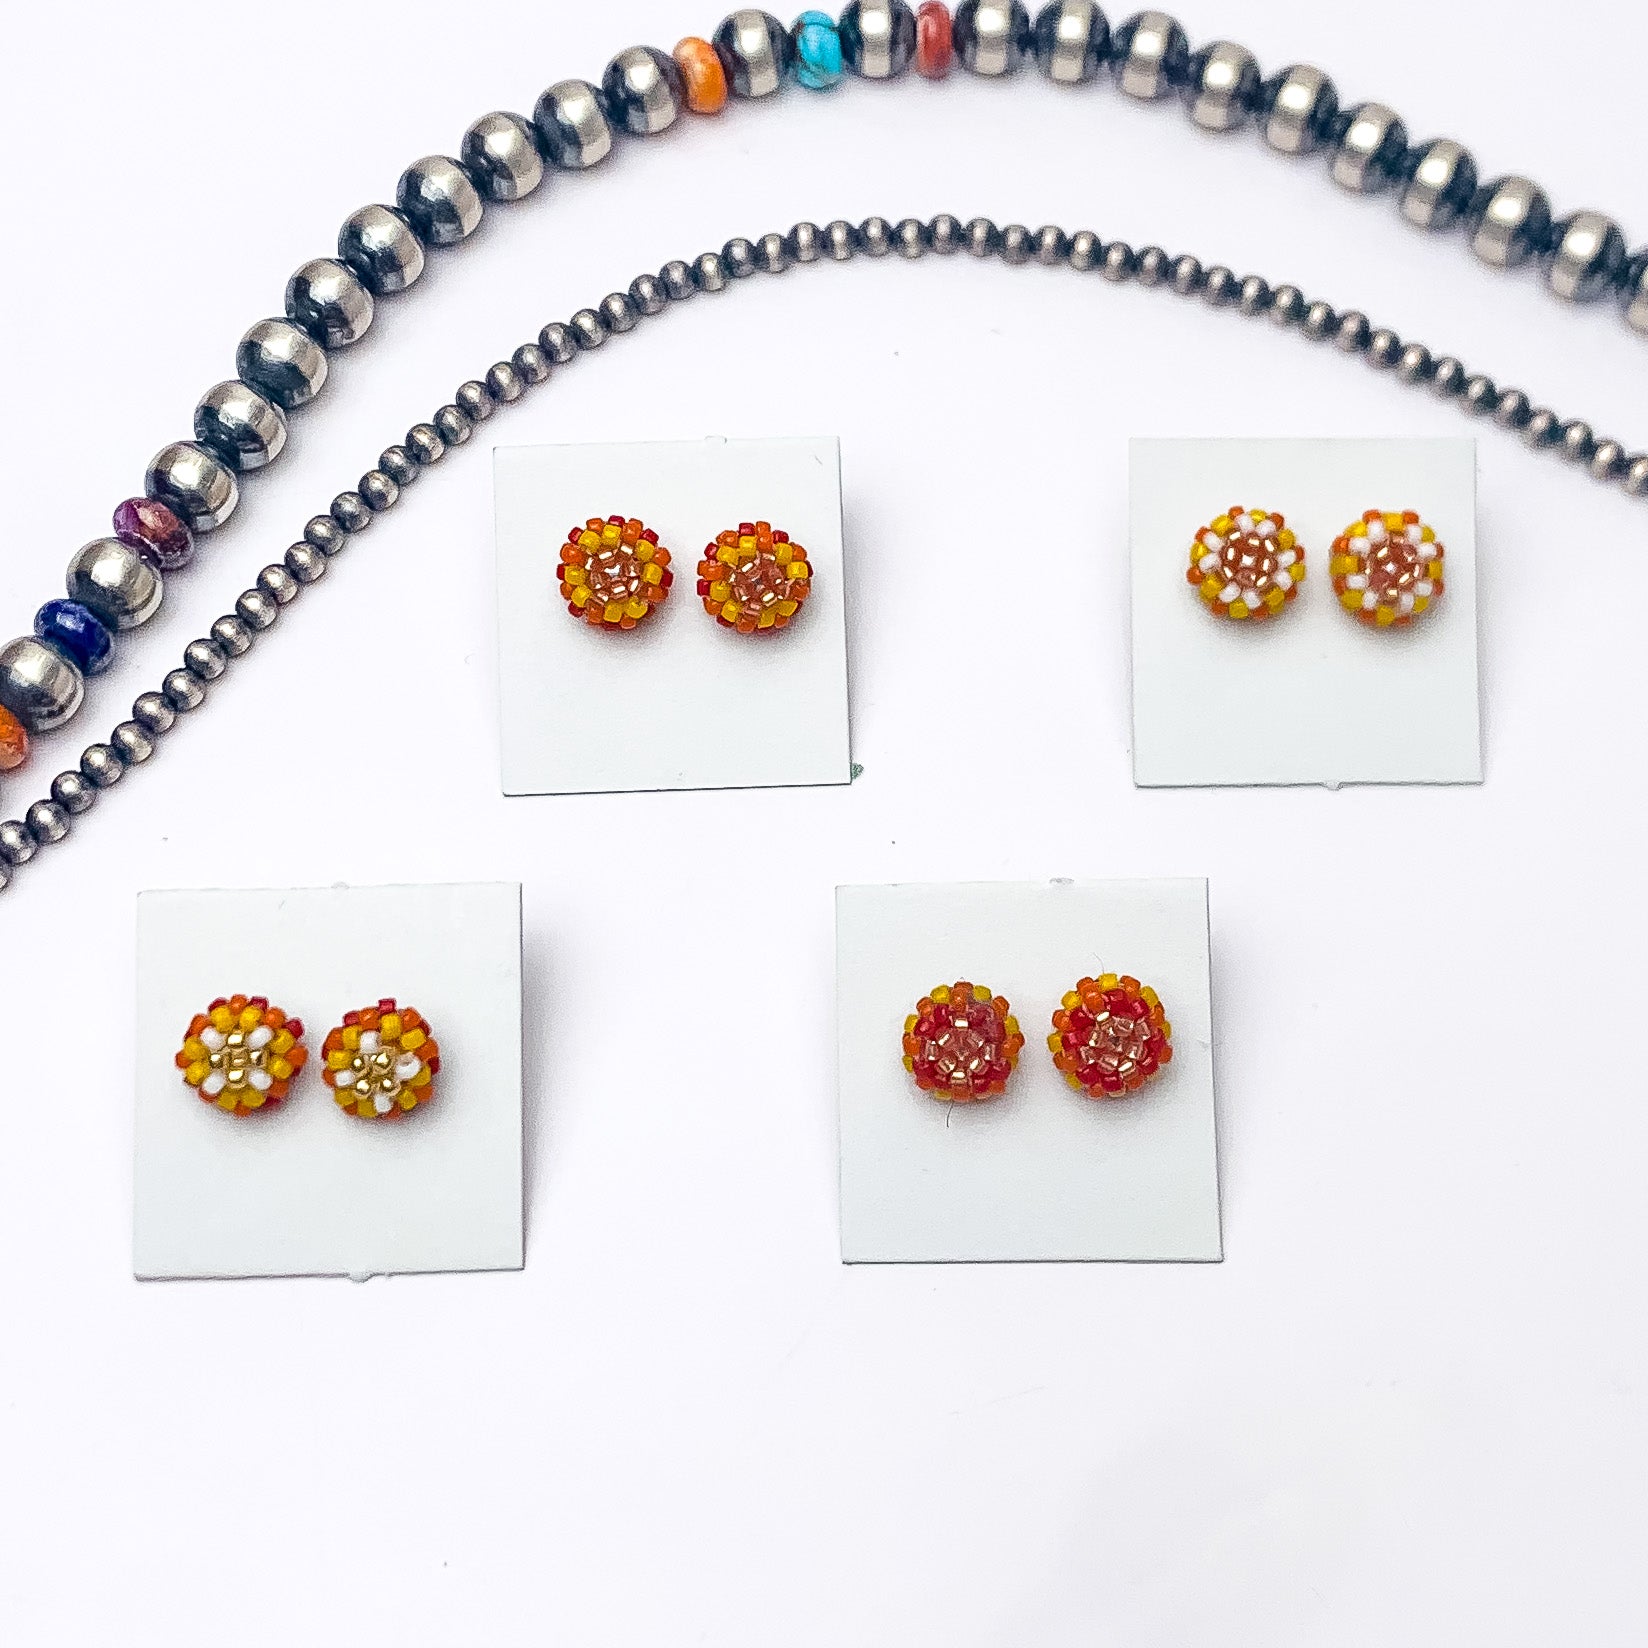 Pictured are four pairs of circle, beaded stud earrings in a mix of orange beads that are different in each pair. These earrings are pictured on a white background with silver beads above the studs. 